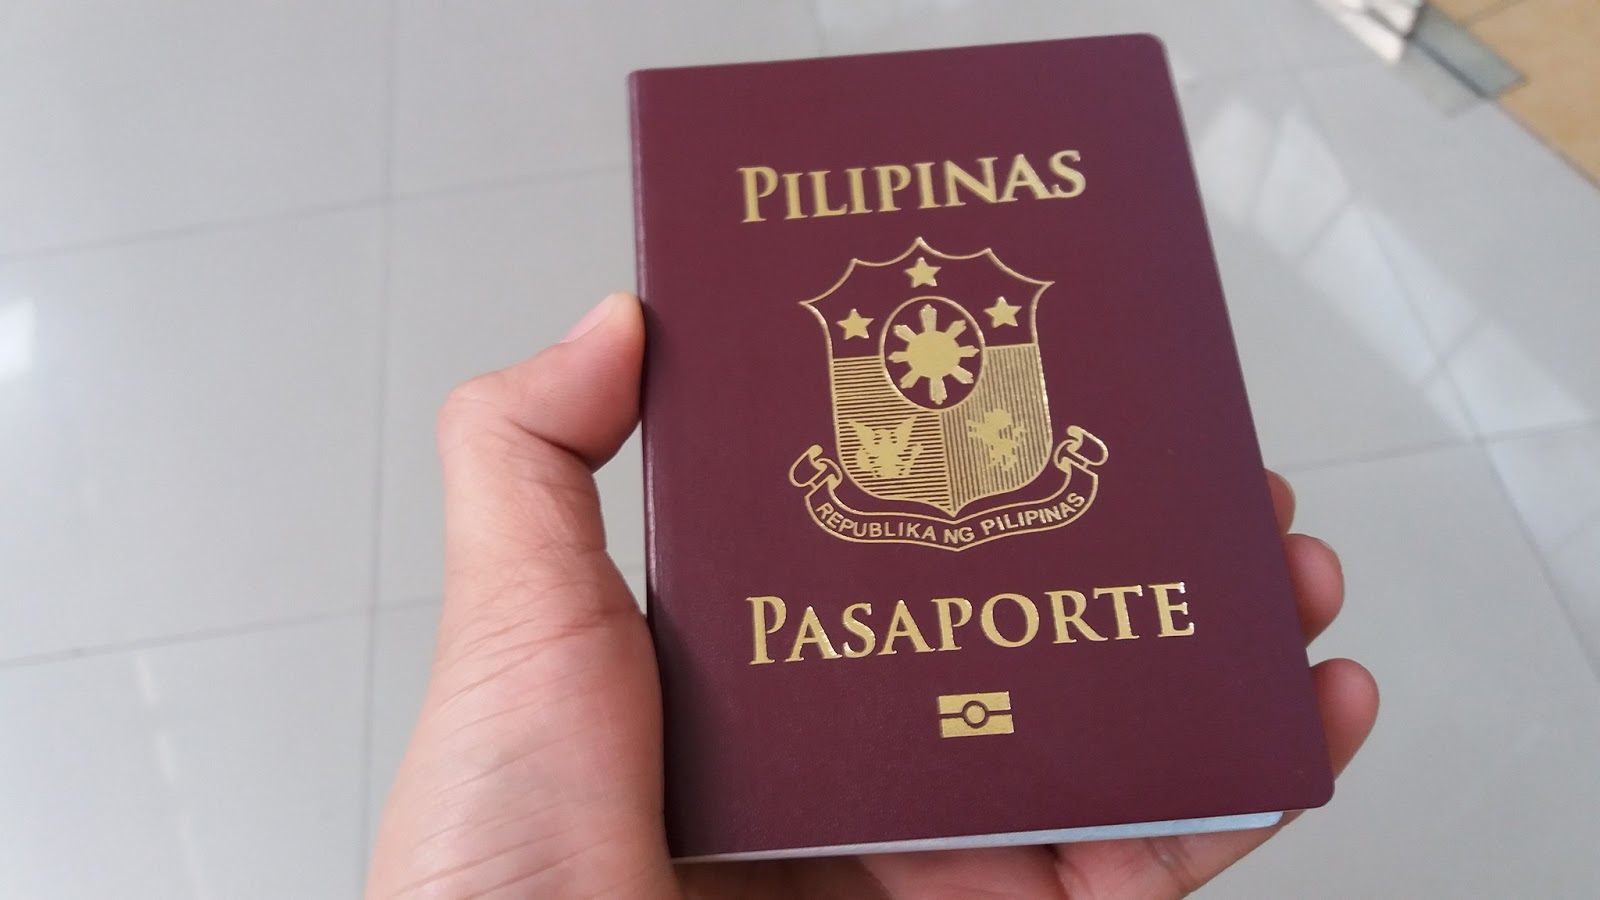 Vietnam Resume Tourist Visa For Philippines People From March 2022 | Process To Apply Vietnam Tourist Visa From Philippines 2022